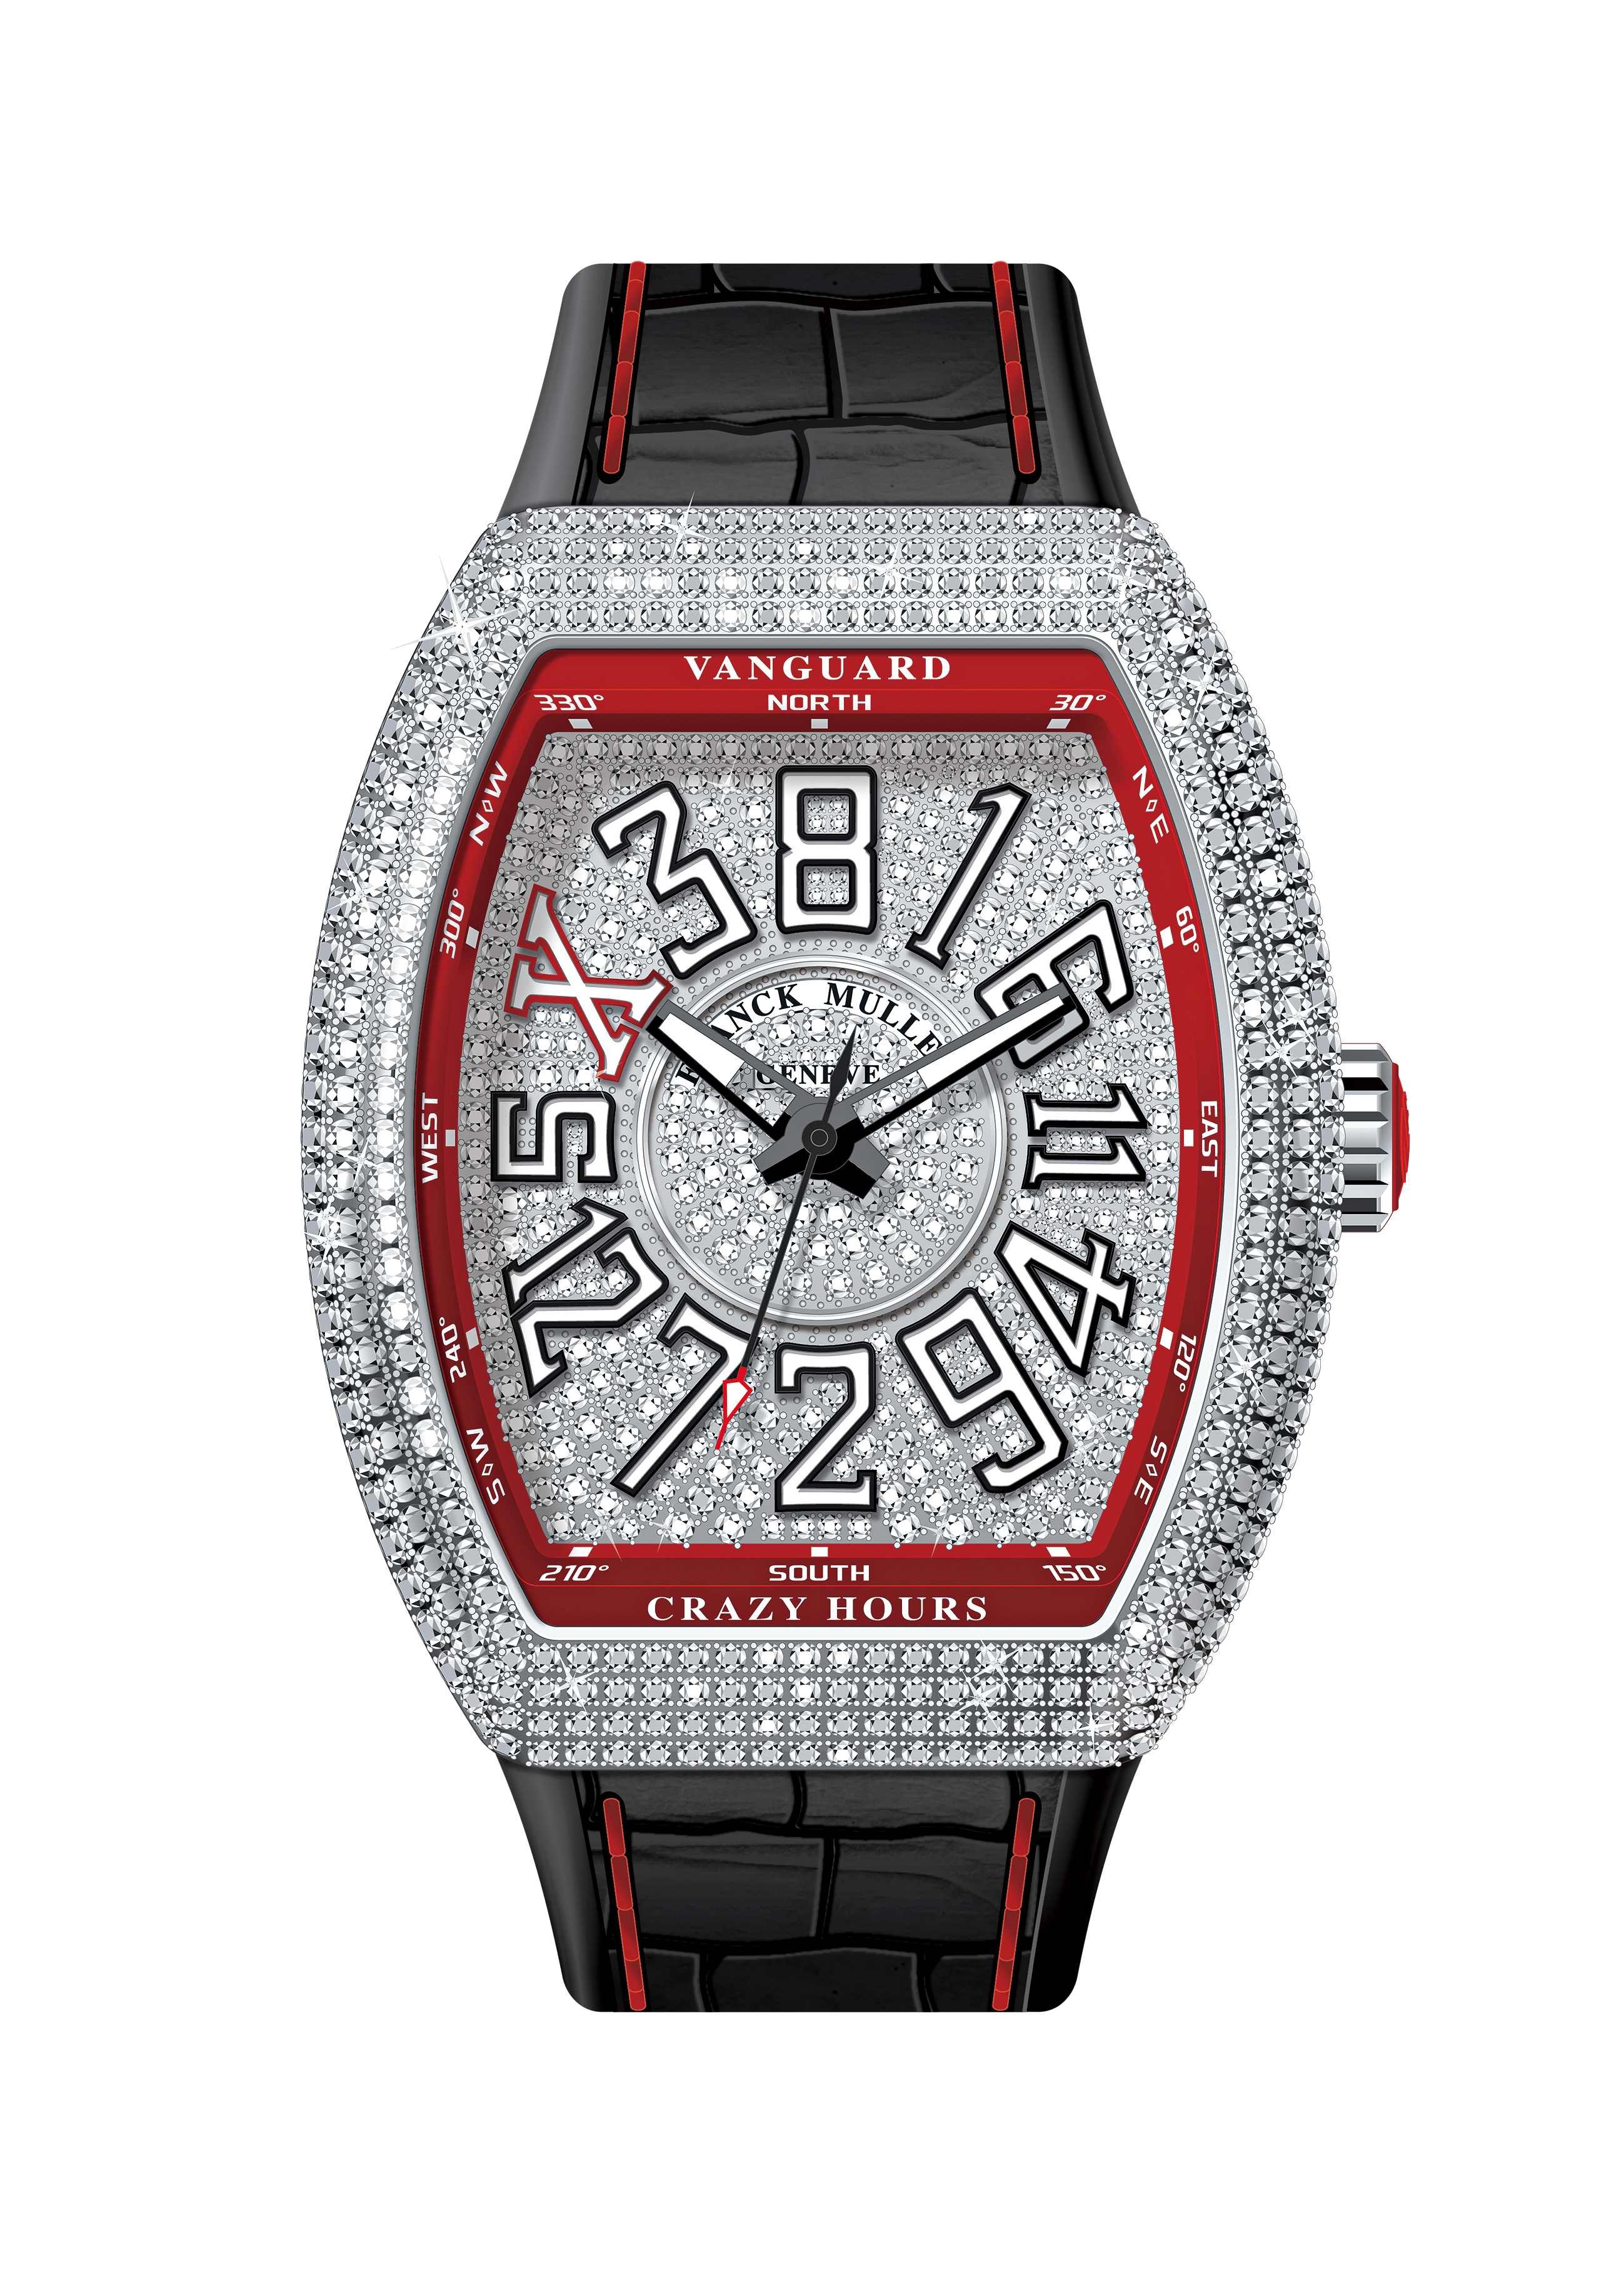 Vanguard Crazy Hours DFS Exclusive (Hero Piece) by Franck Muller will be on show at the ‘Masters of Time X’ exhibition in Macau.